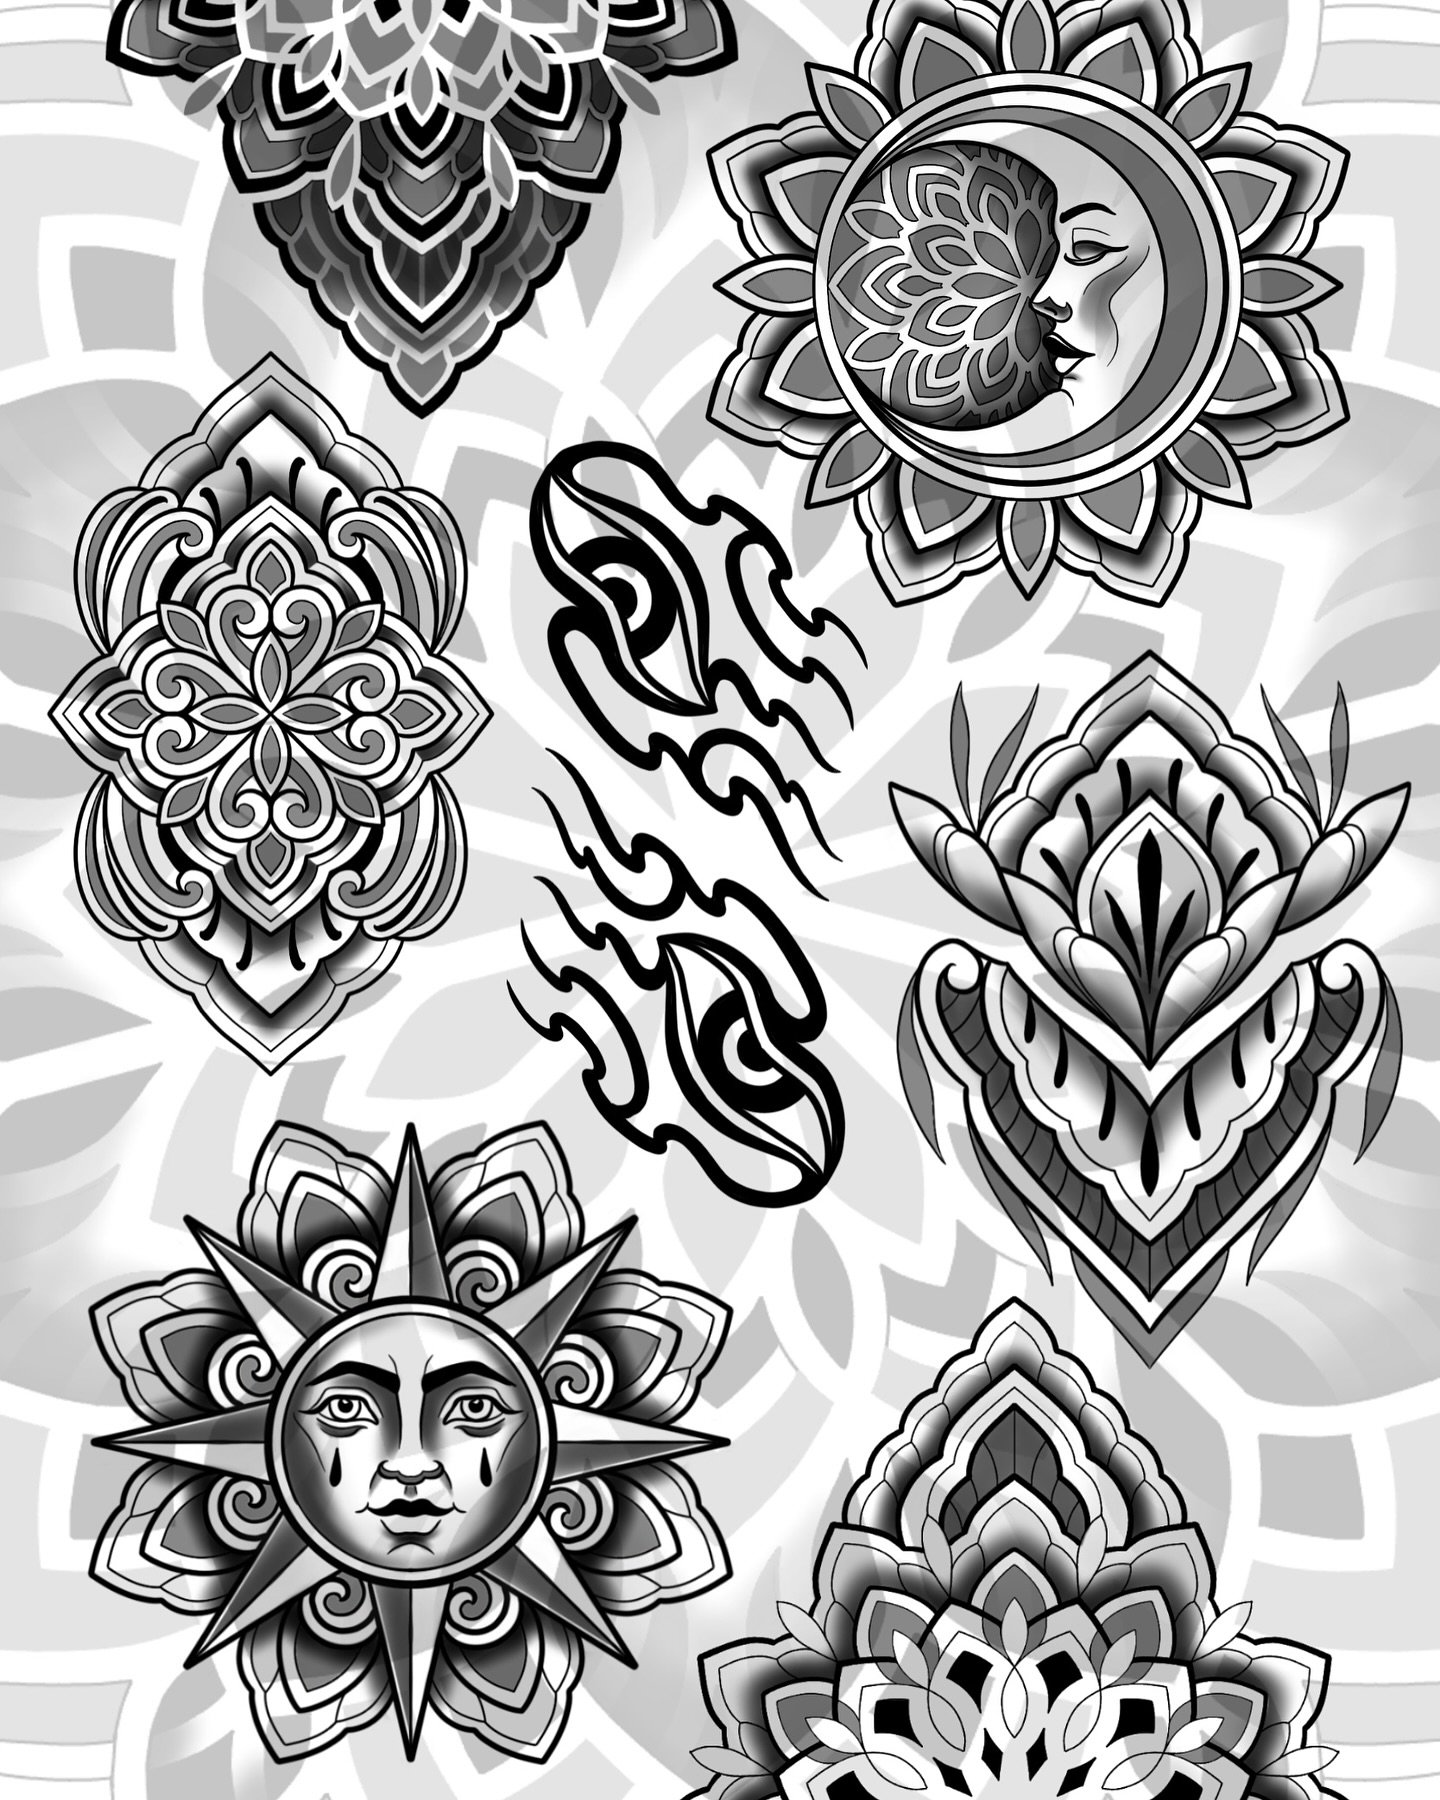 @piri.green.tattoos has these flash pieces available 
All roughly palm size.

Send us a dm to secure one !! 

Afterpay and Laybuy available